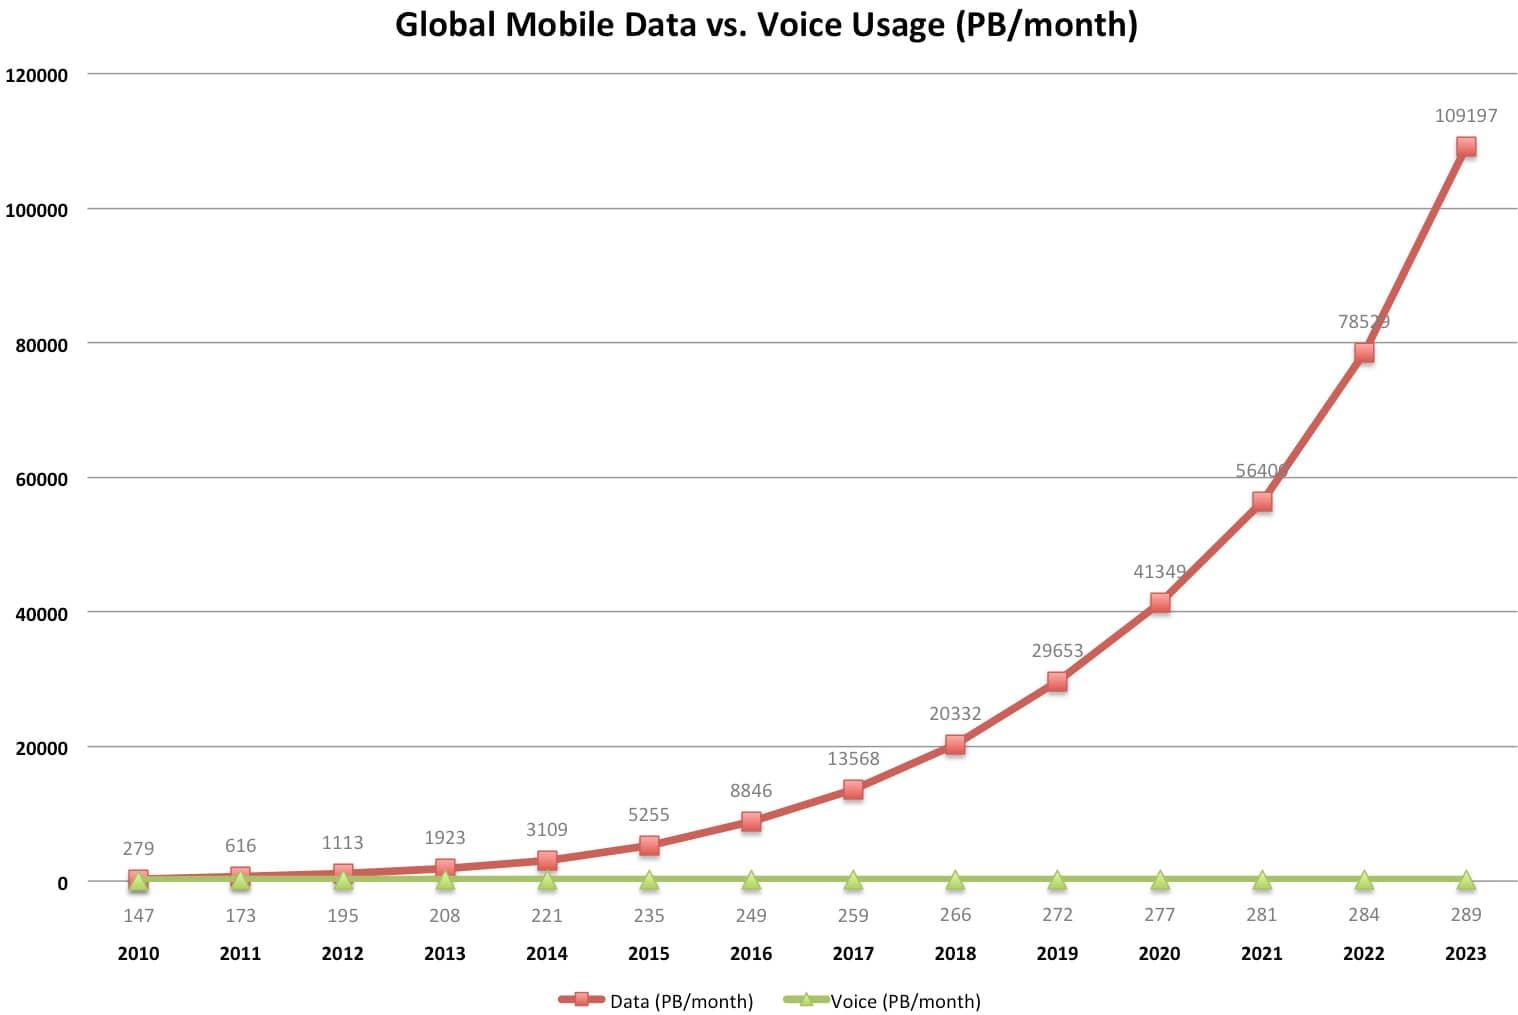 A graph showing the number of mobile data